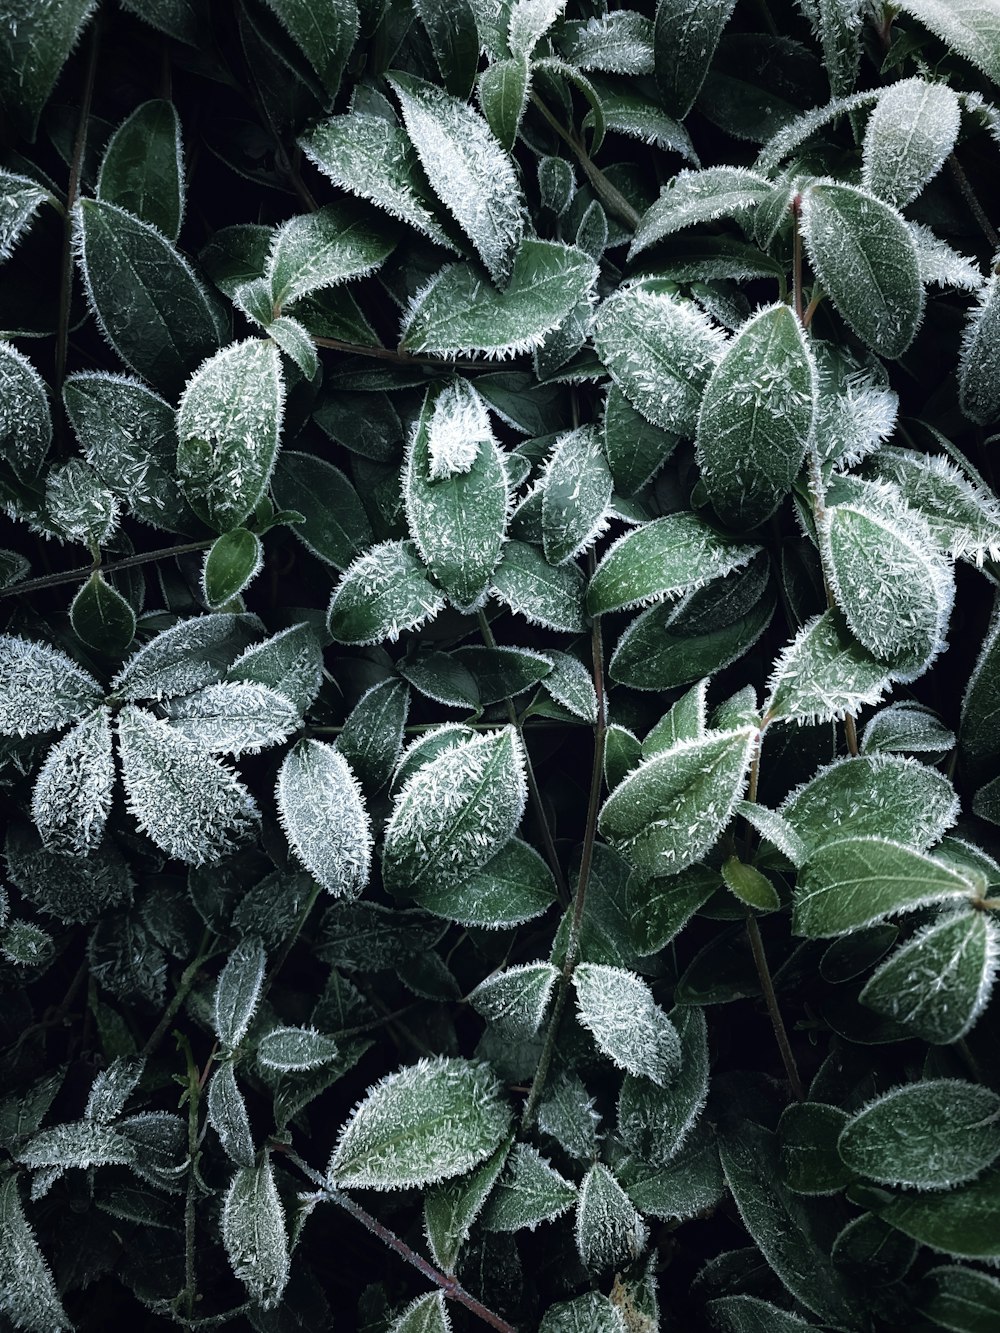 a bush with frosted leaves on it